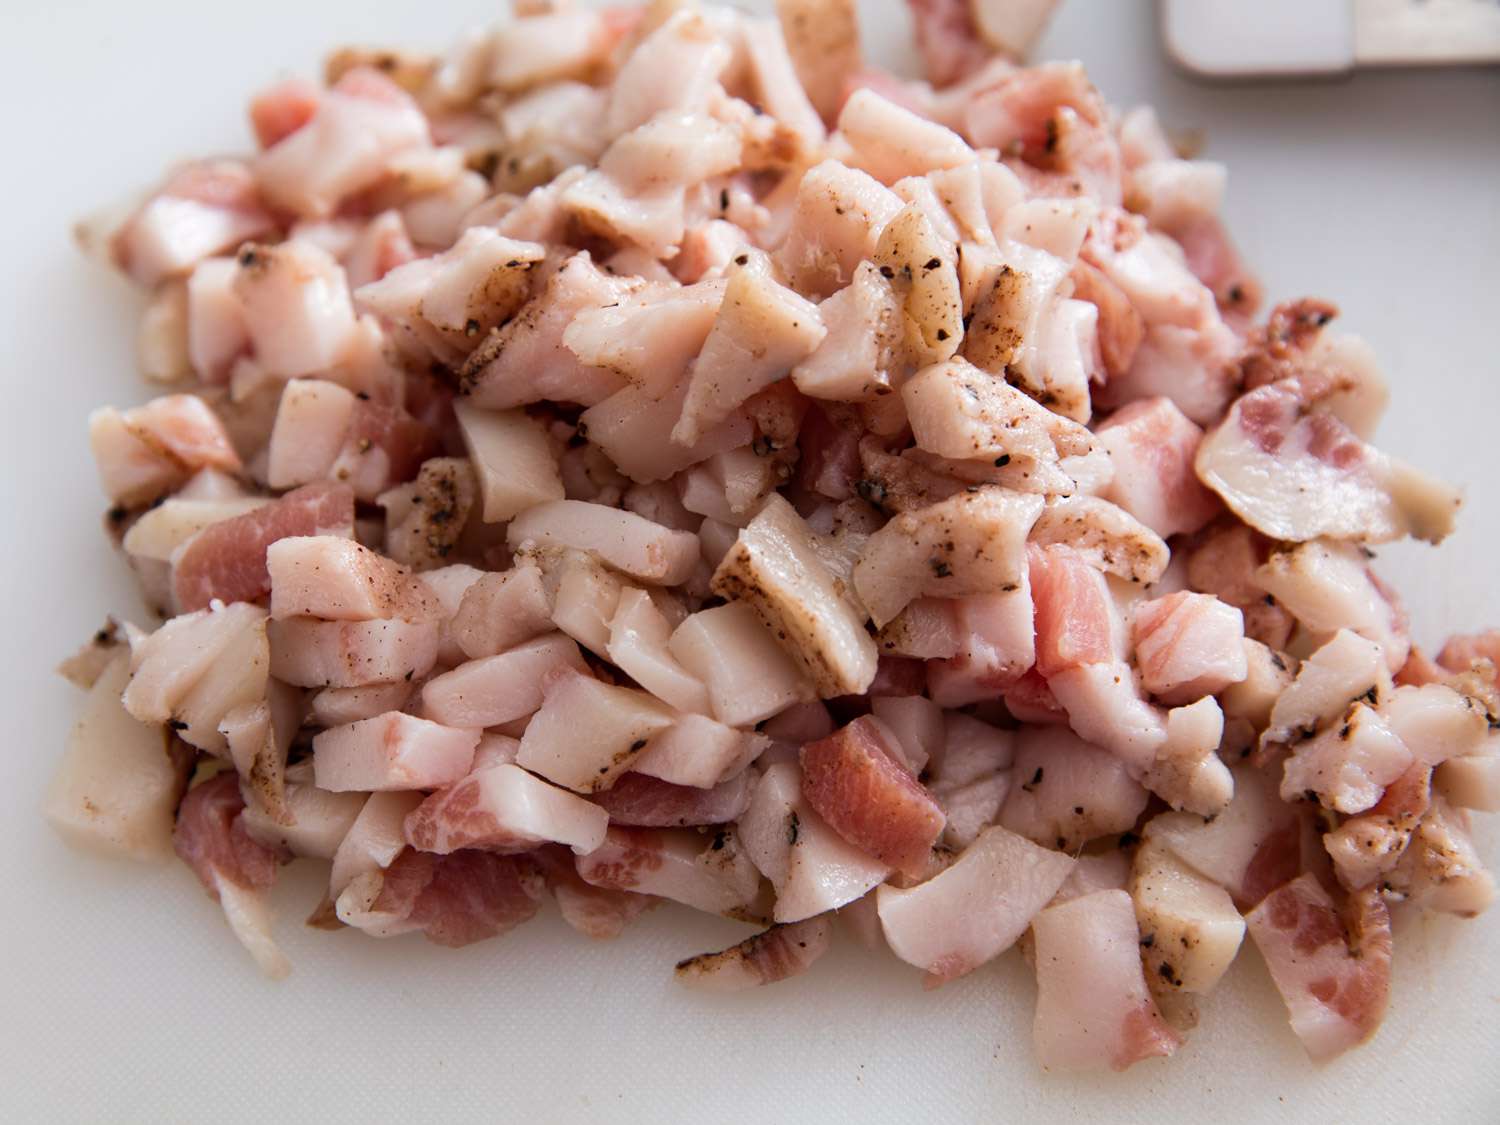 A pile of guanciale cut into thick chunks.